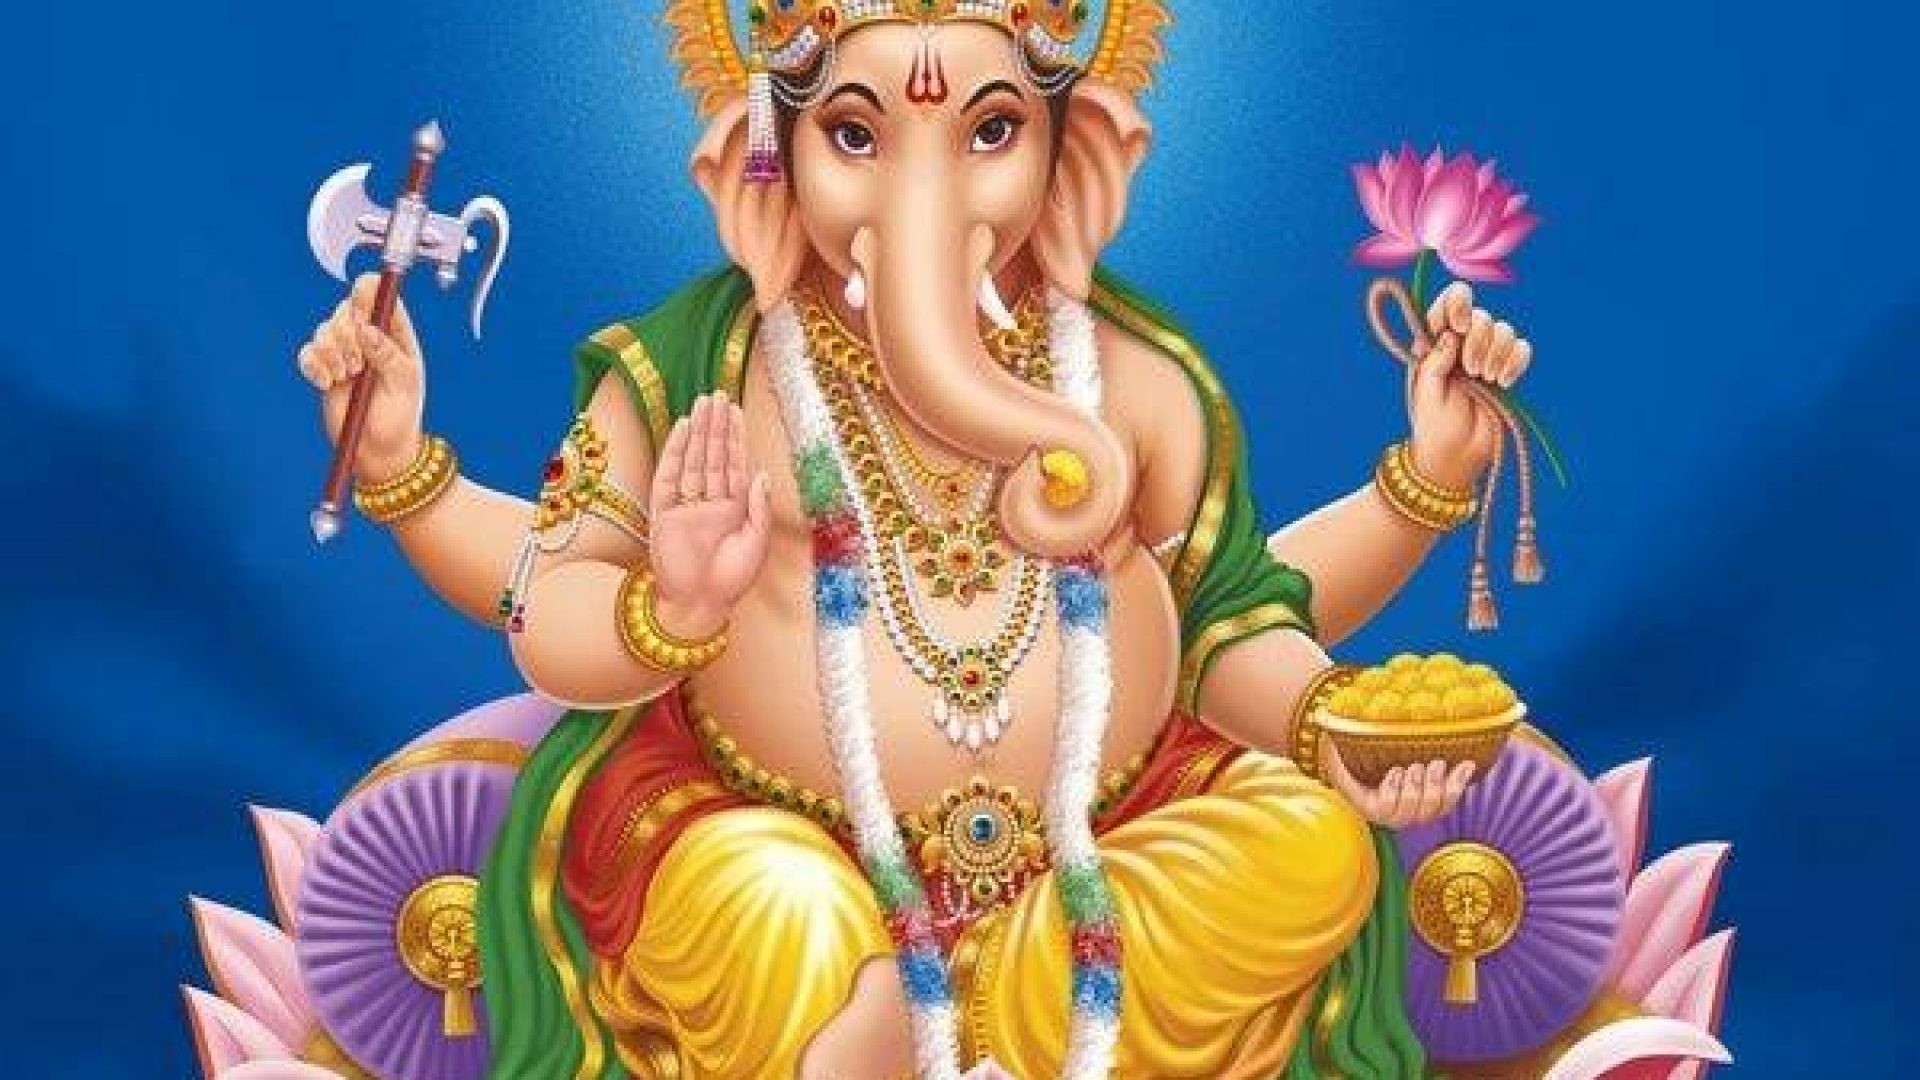 Pictures Of Lord Ganesha Wallpapers.